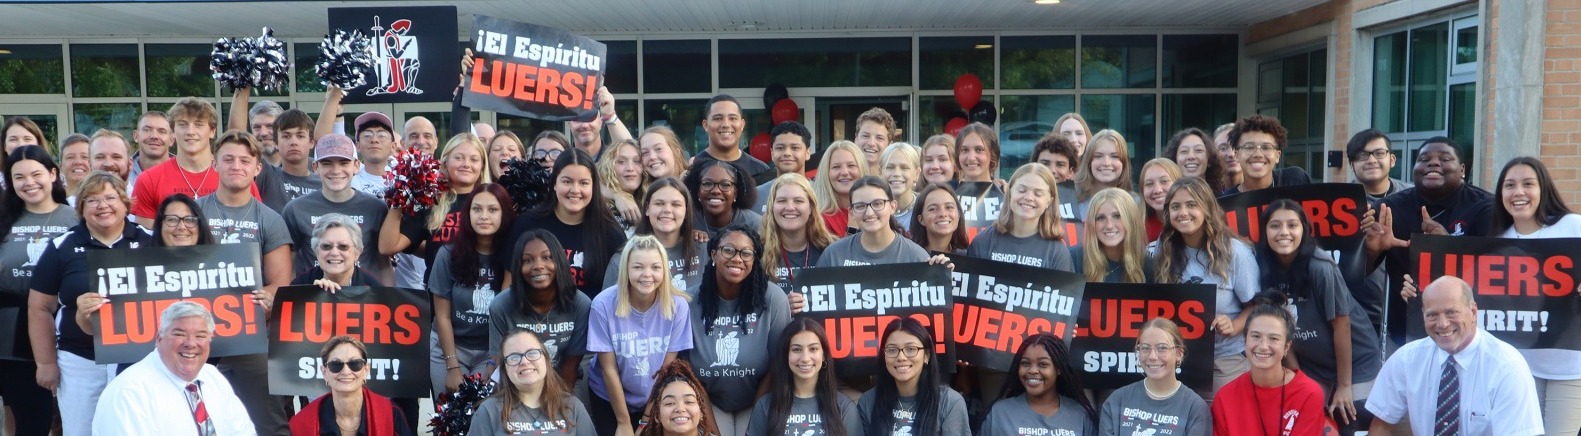 a large group of students smiling and holding "El espíritu Luers!/Luers Spirit!" banners